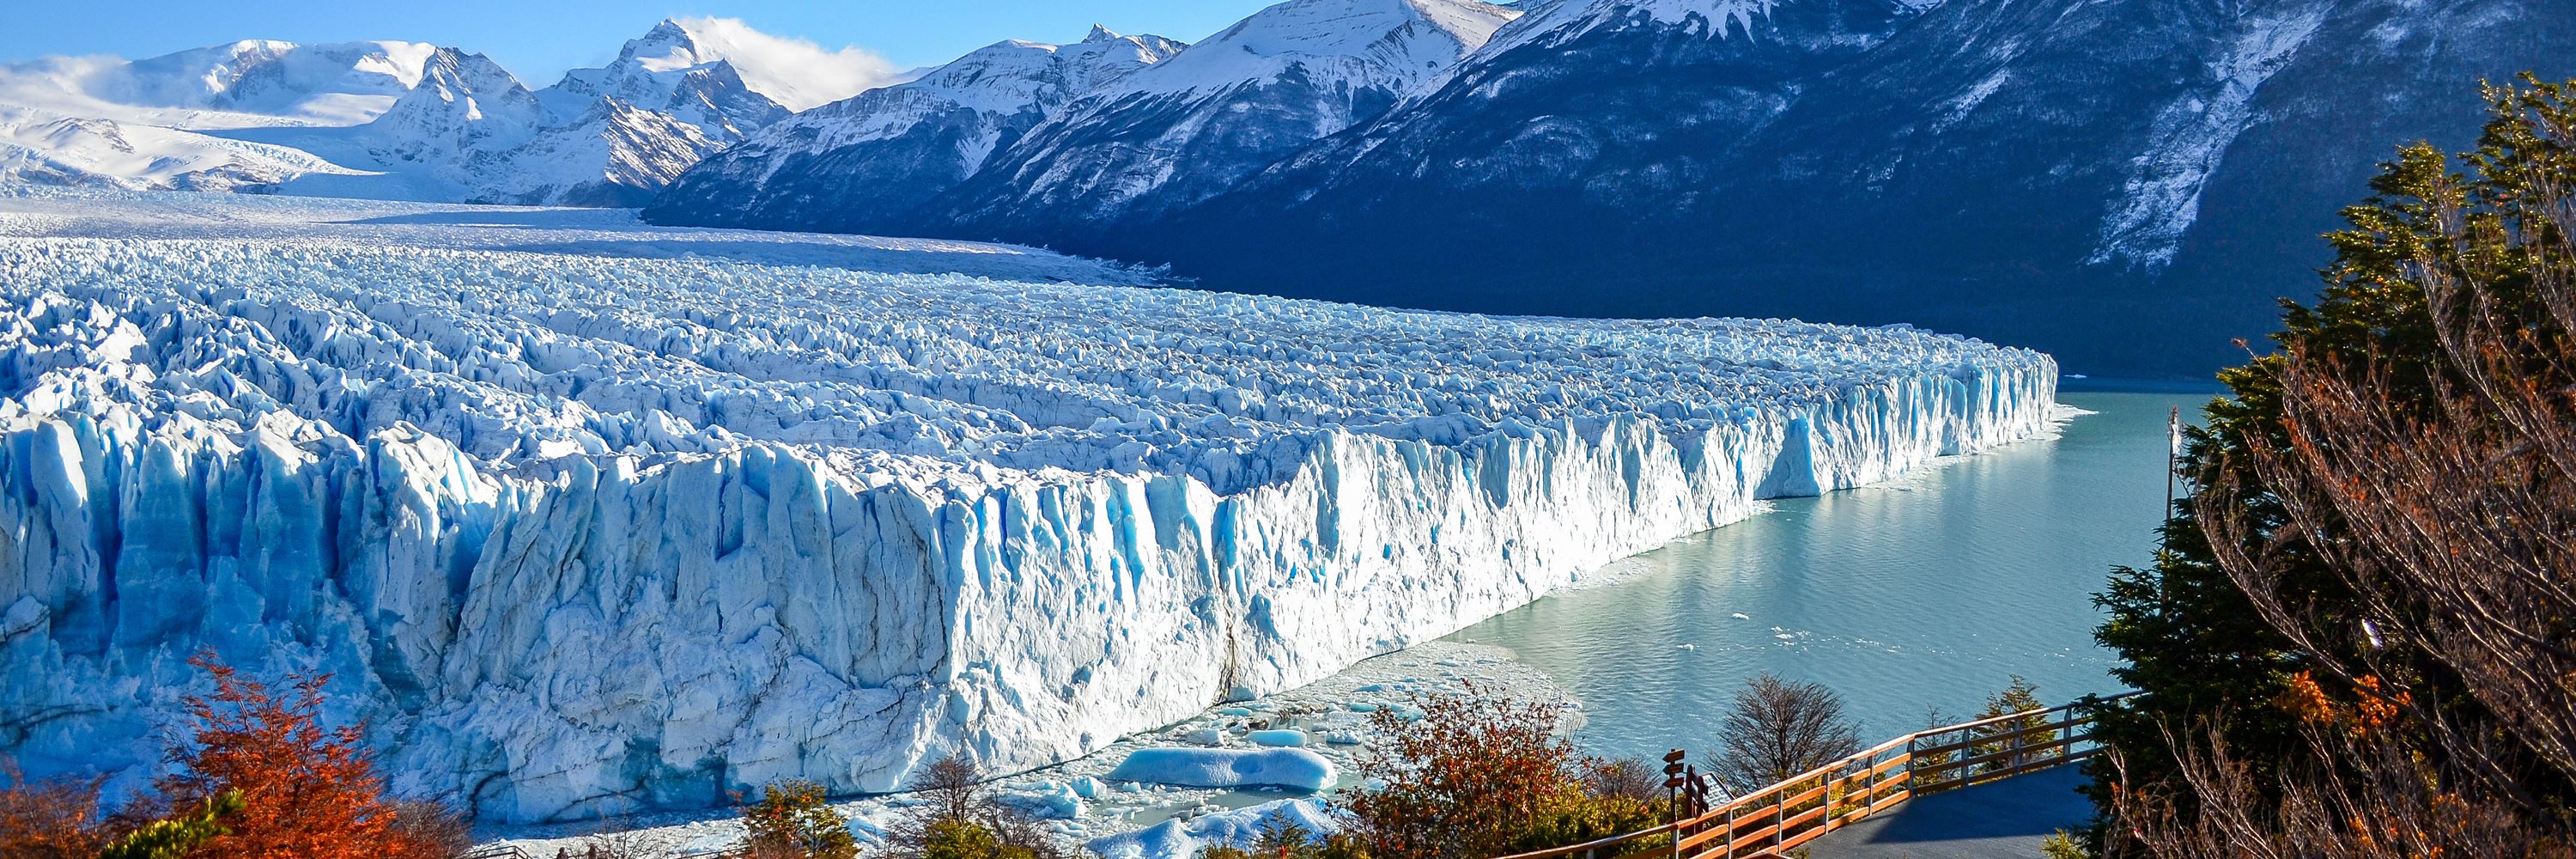 Patagonia highlights guide | Audley Travel US